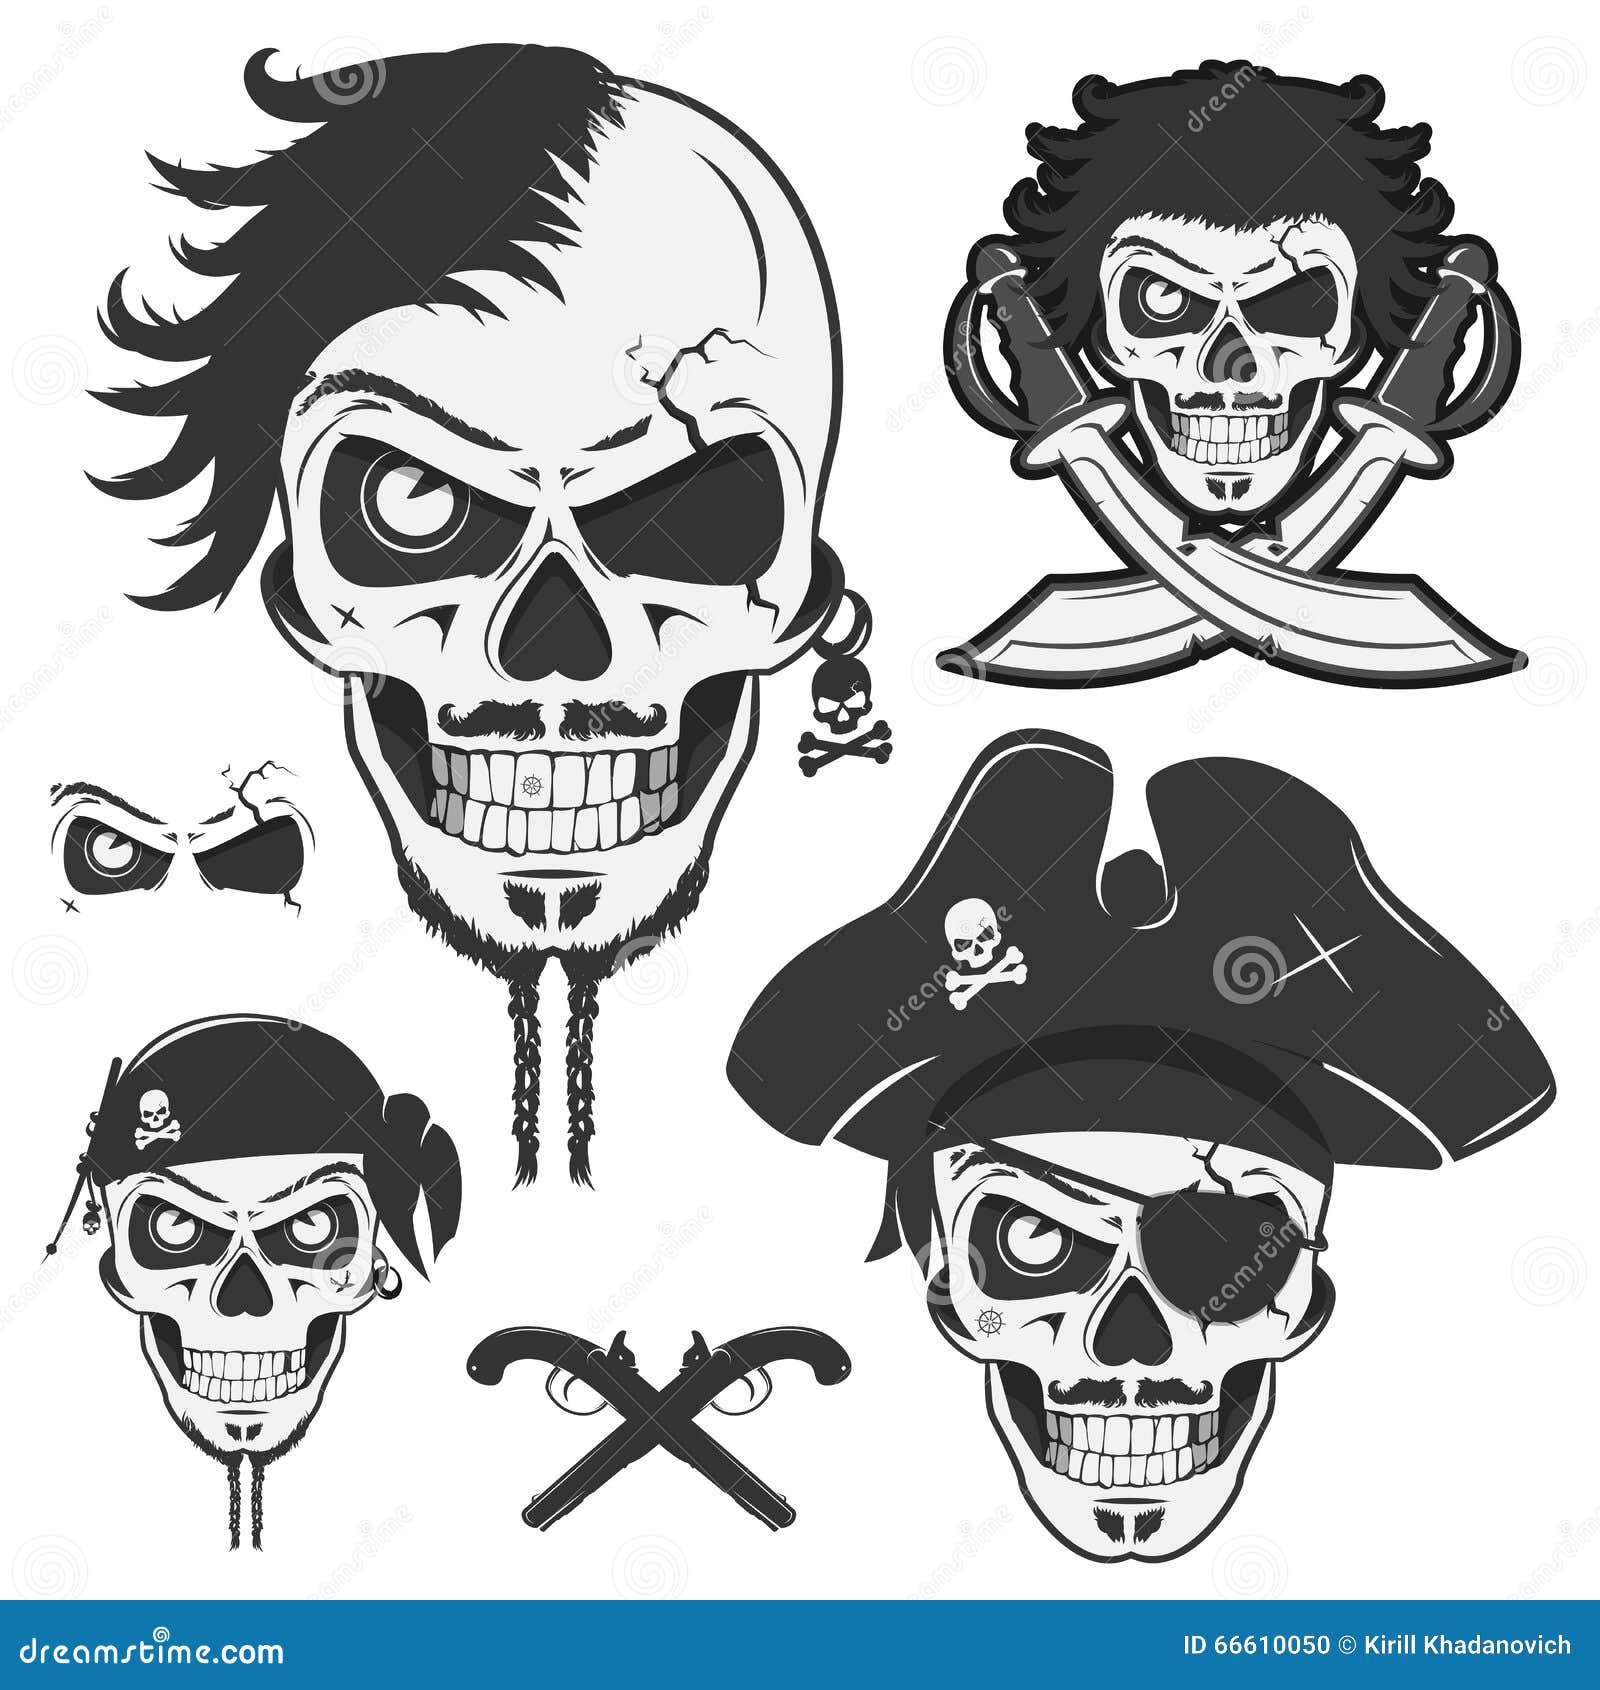 1200 Old School Tattoo Stock Photos Pictures  RoyaltyFree Images   iStock  Old school tattoo vector Old school tattoo pirate ship Old  school tattoo heart